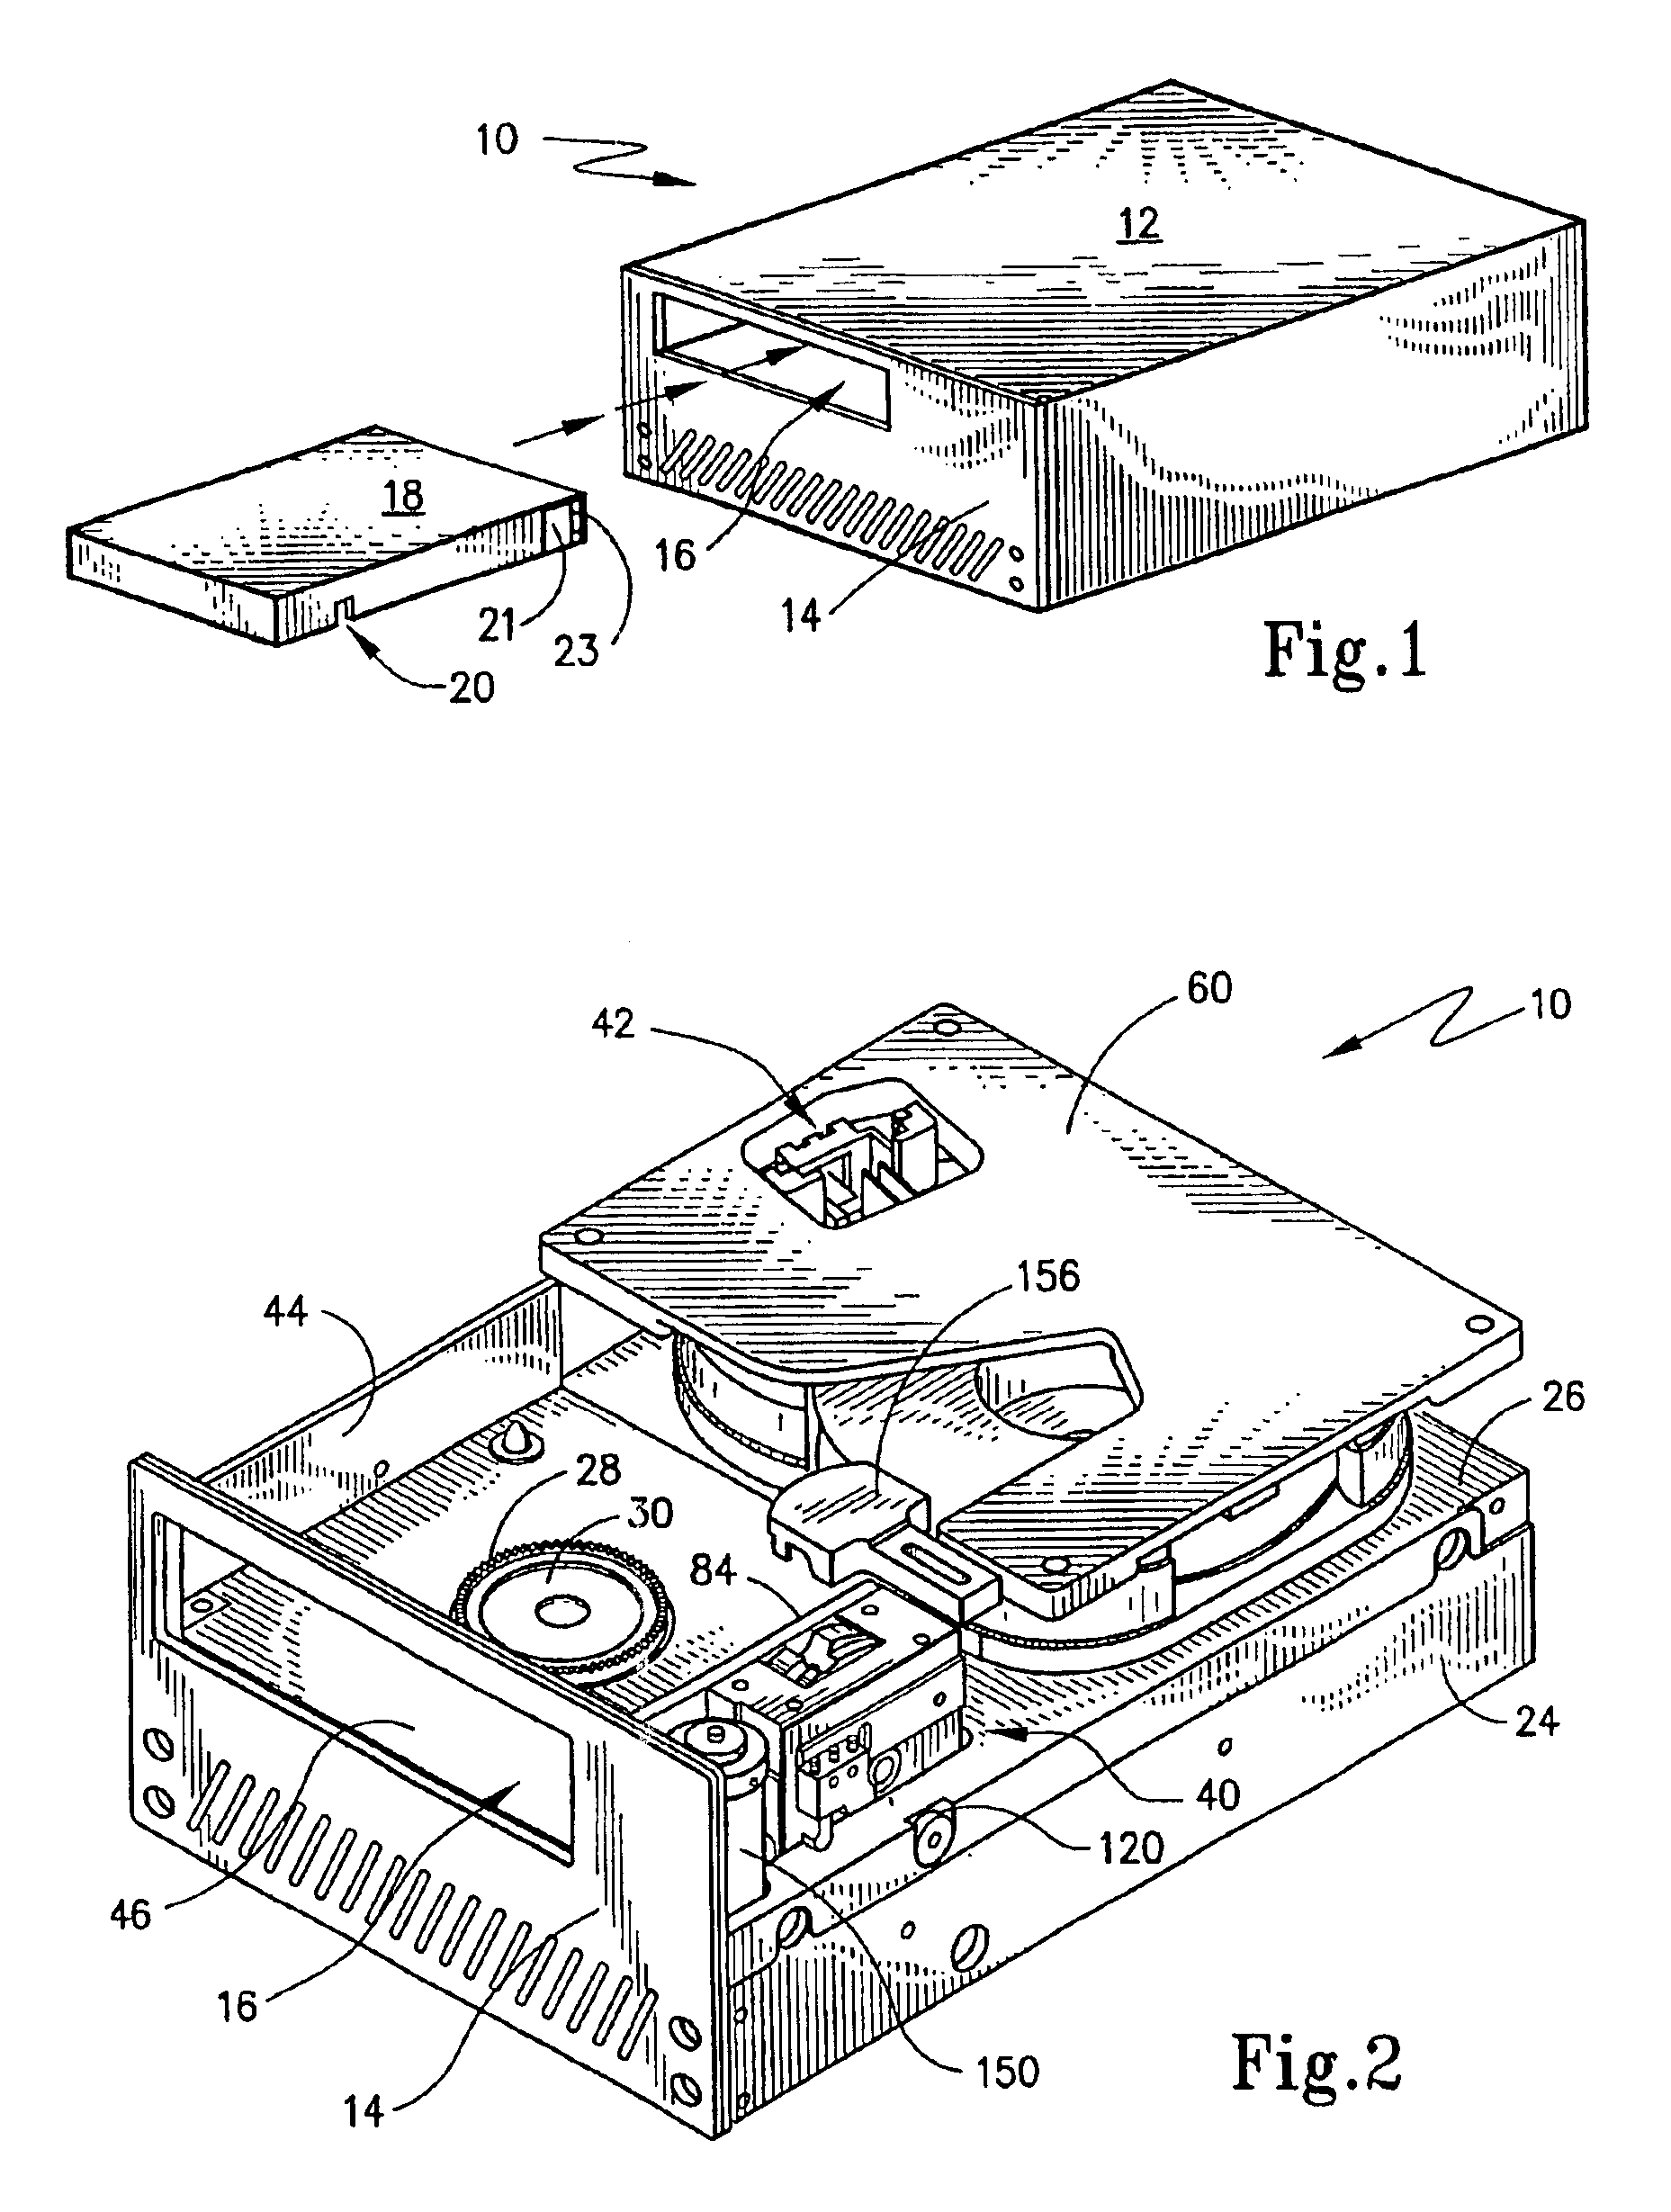 Tape cartridge docking apparatus for read/write recording assemblies and method therefor